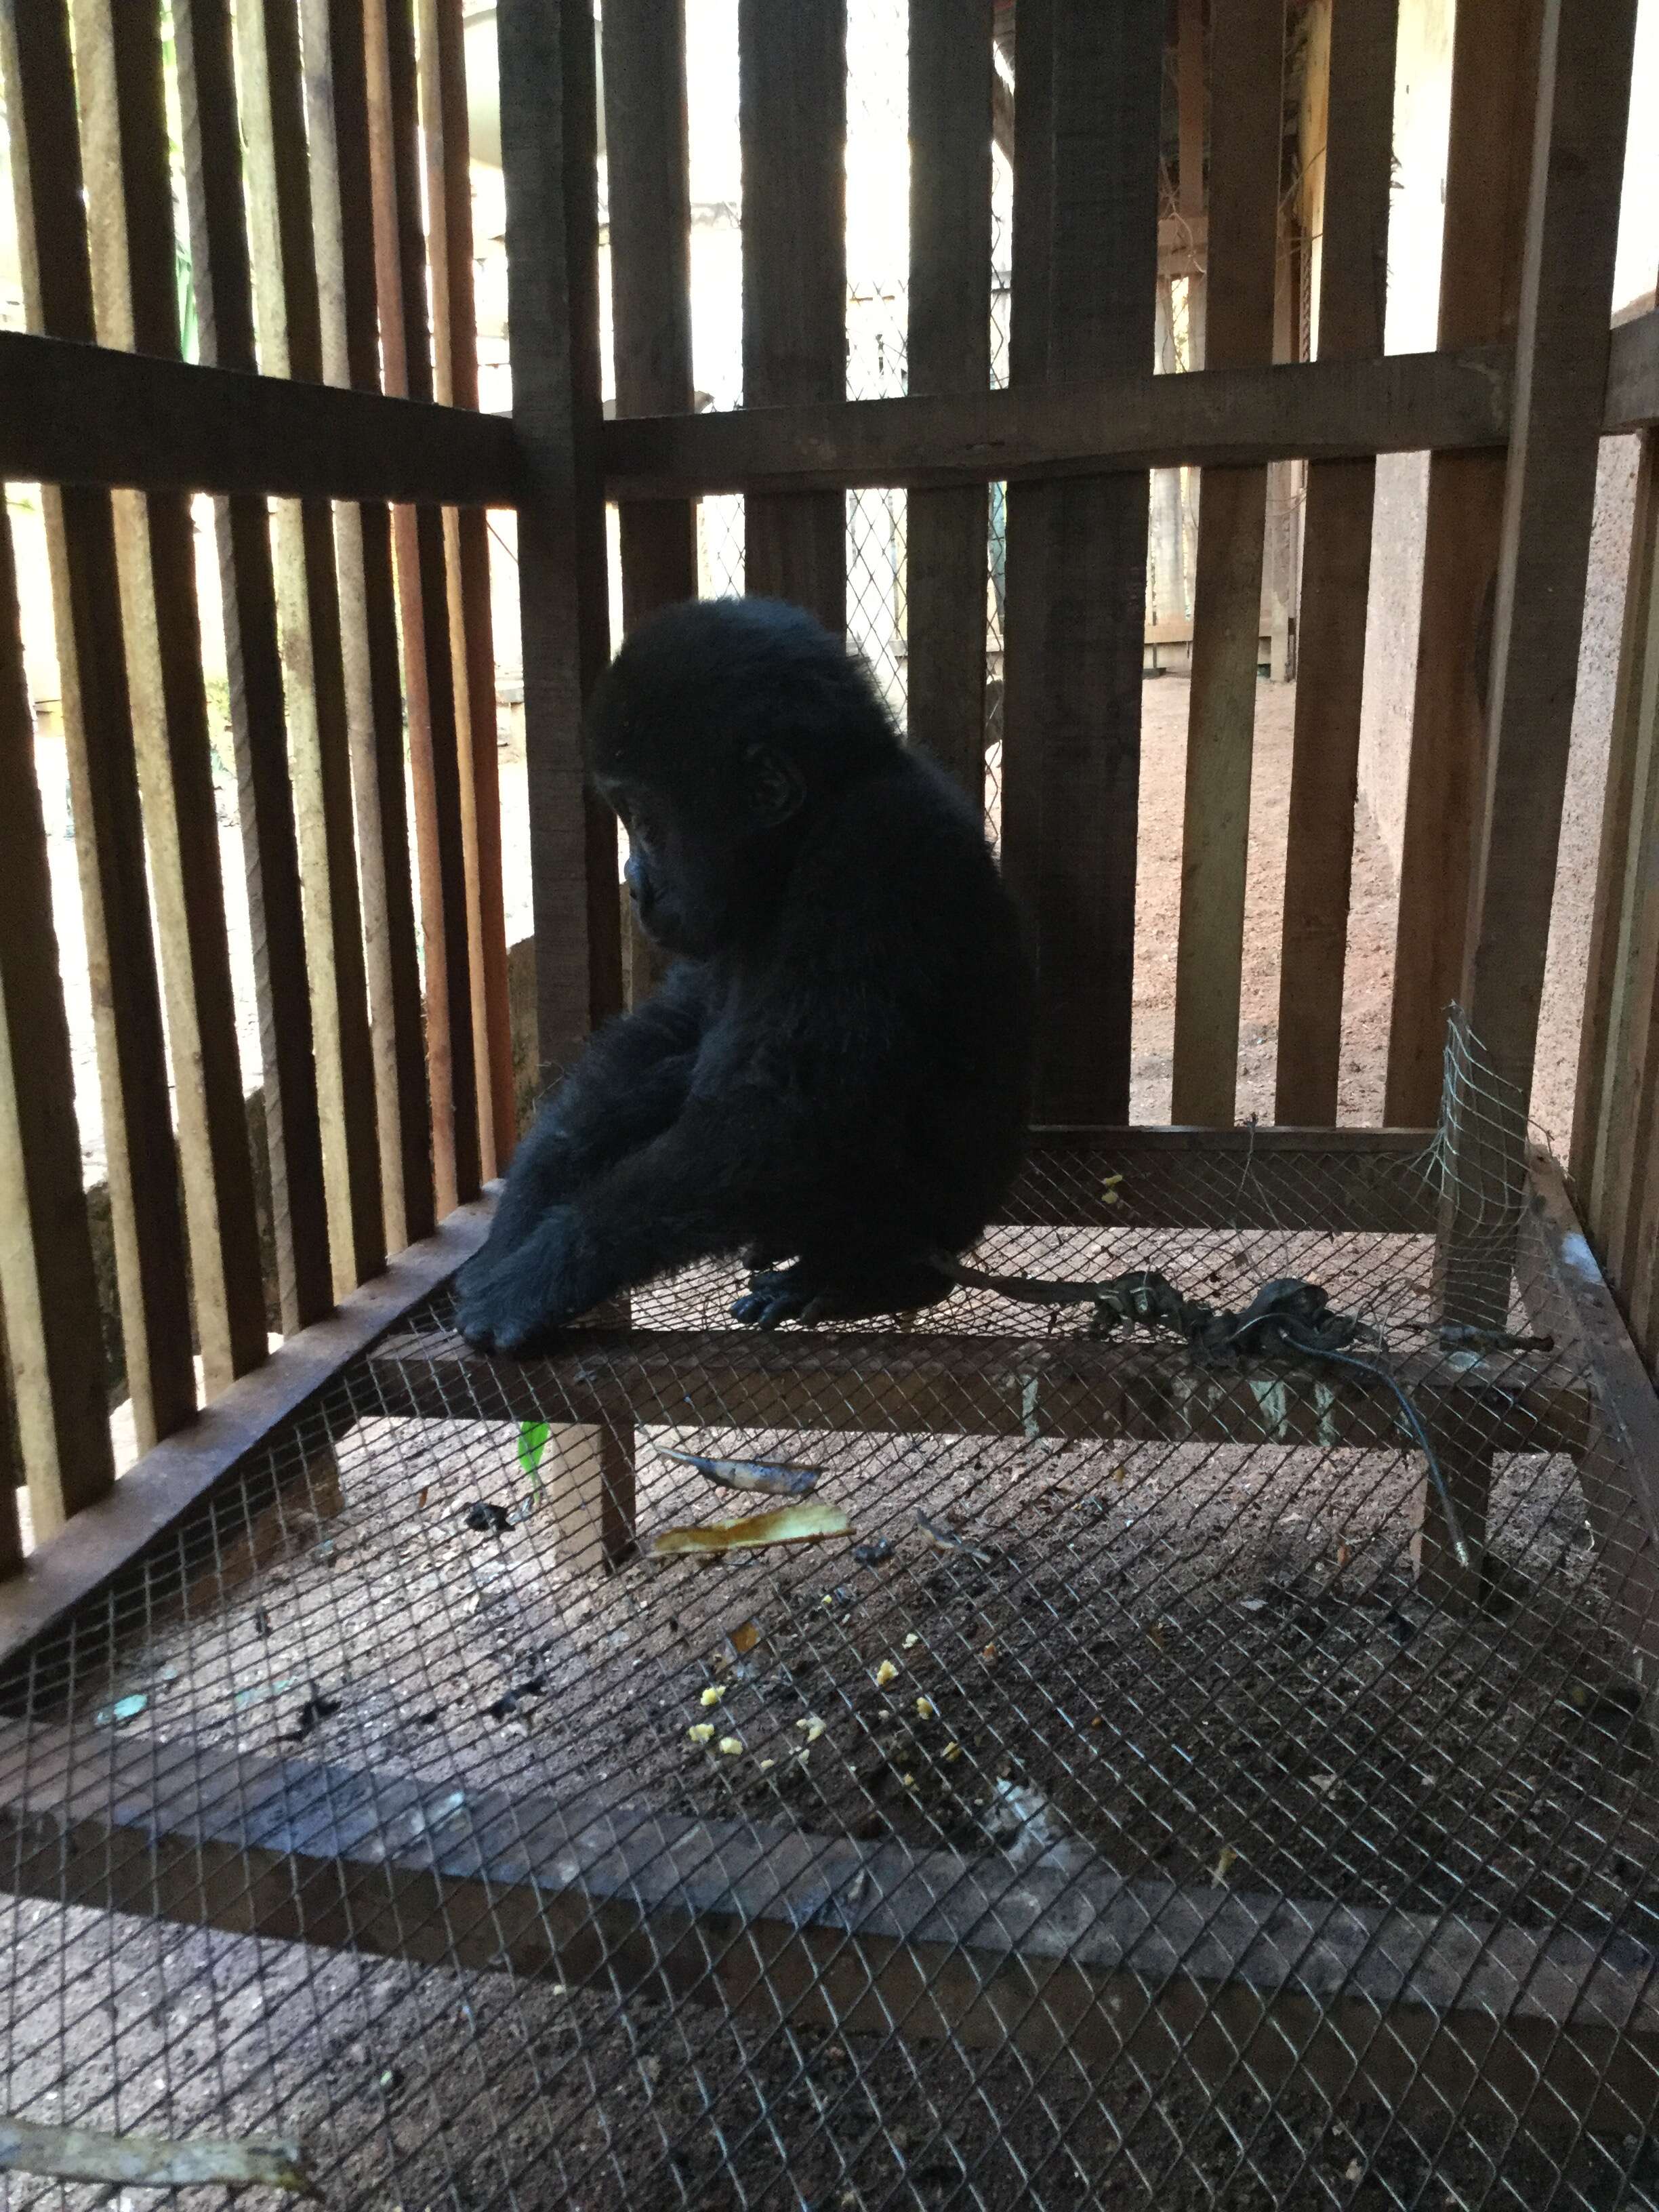 Baby gorilla orphaned by bushmeat trade saved in Cameroon